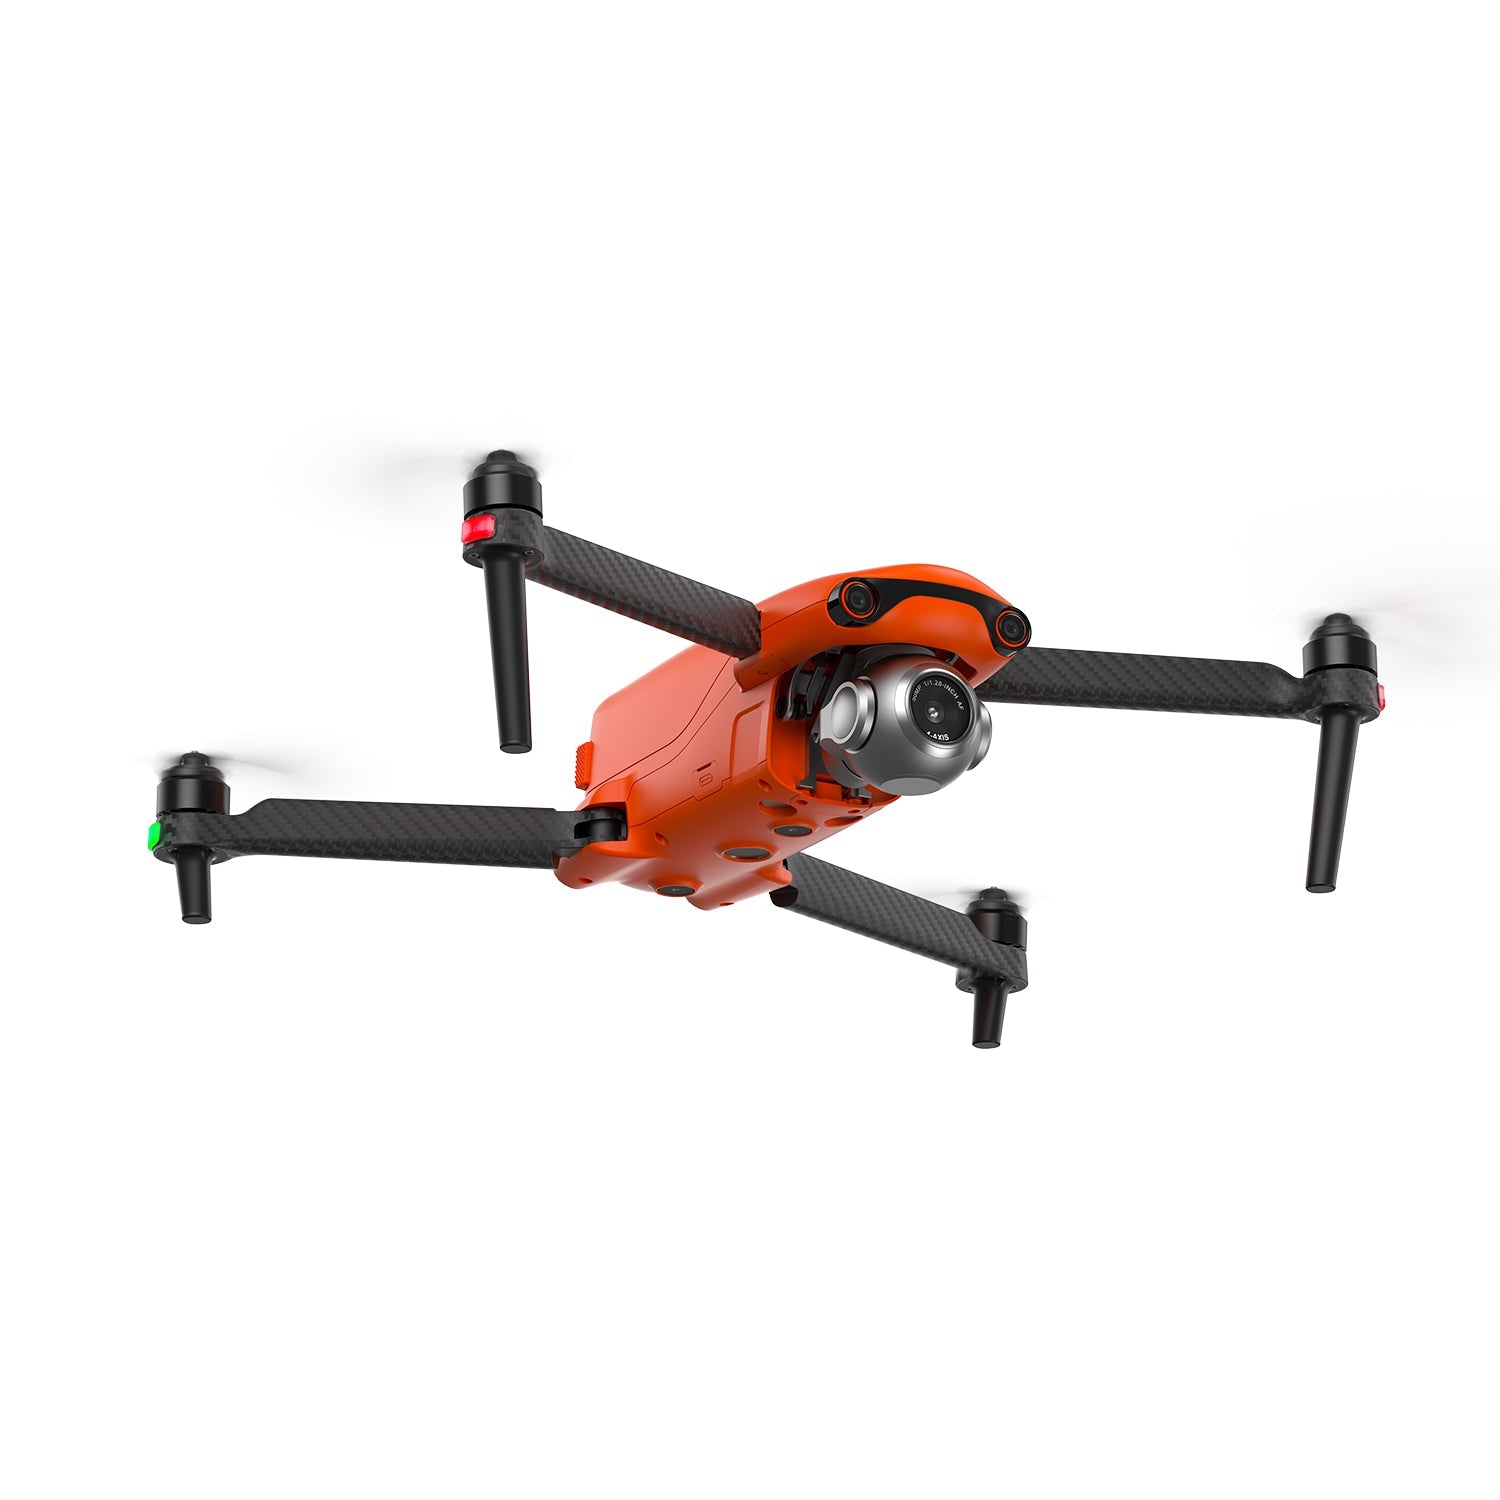 Autel Robotics EVO Lite Drone Premium Bundle 4K Drone for Video and Photos Flying in Air